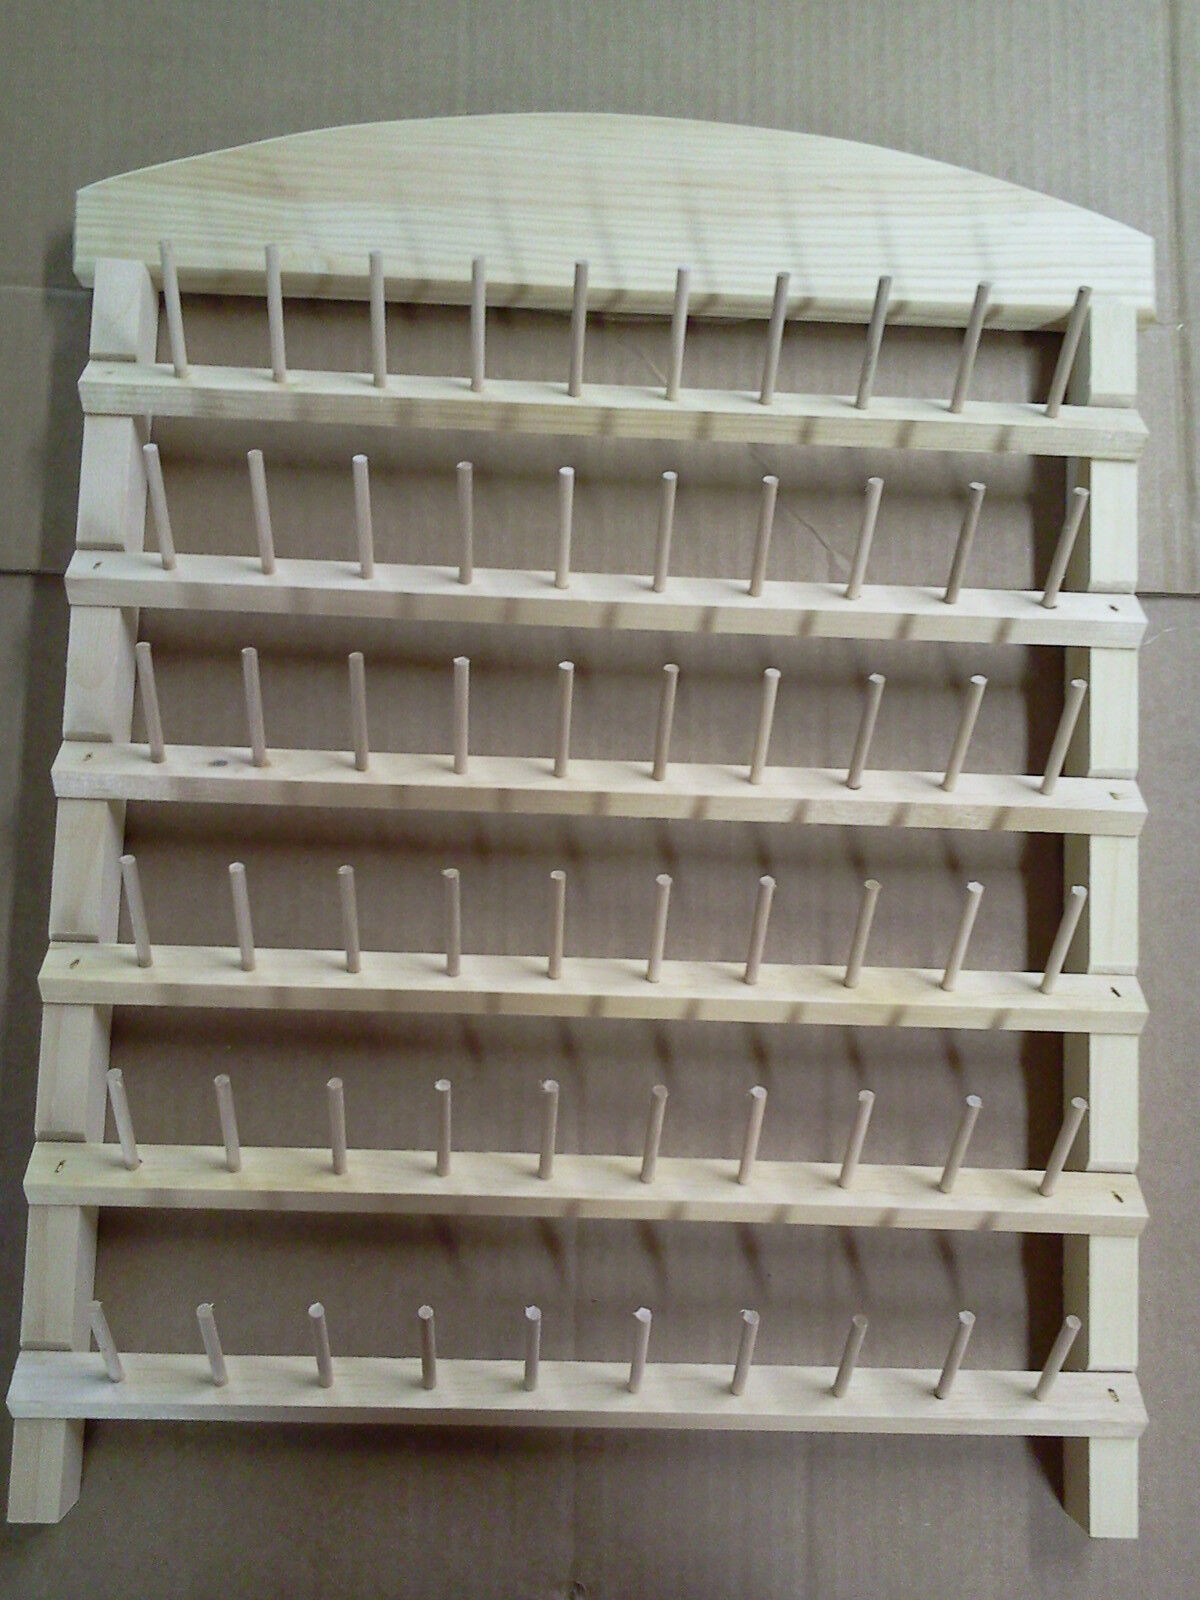 sewing thread rack 60 spool holder unfinished pine wood